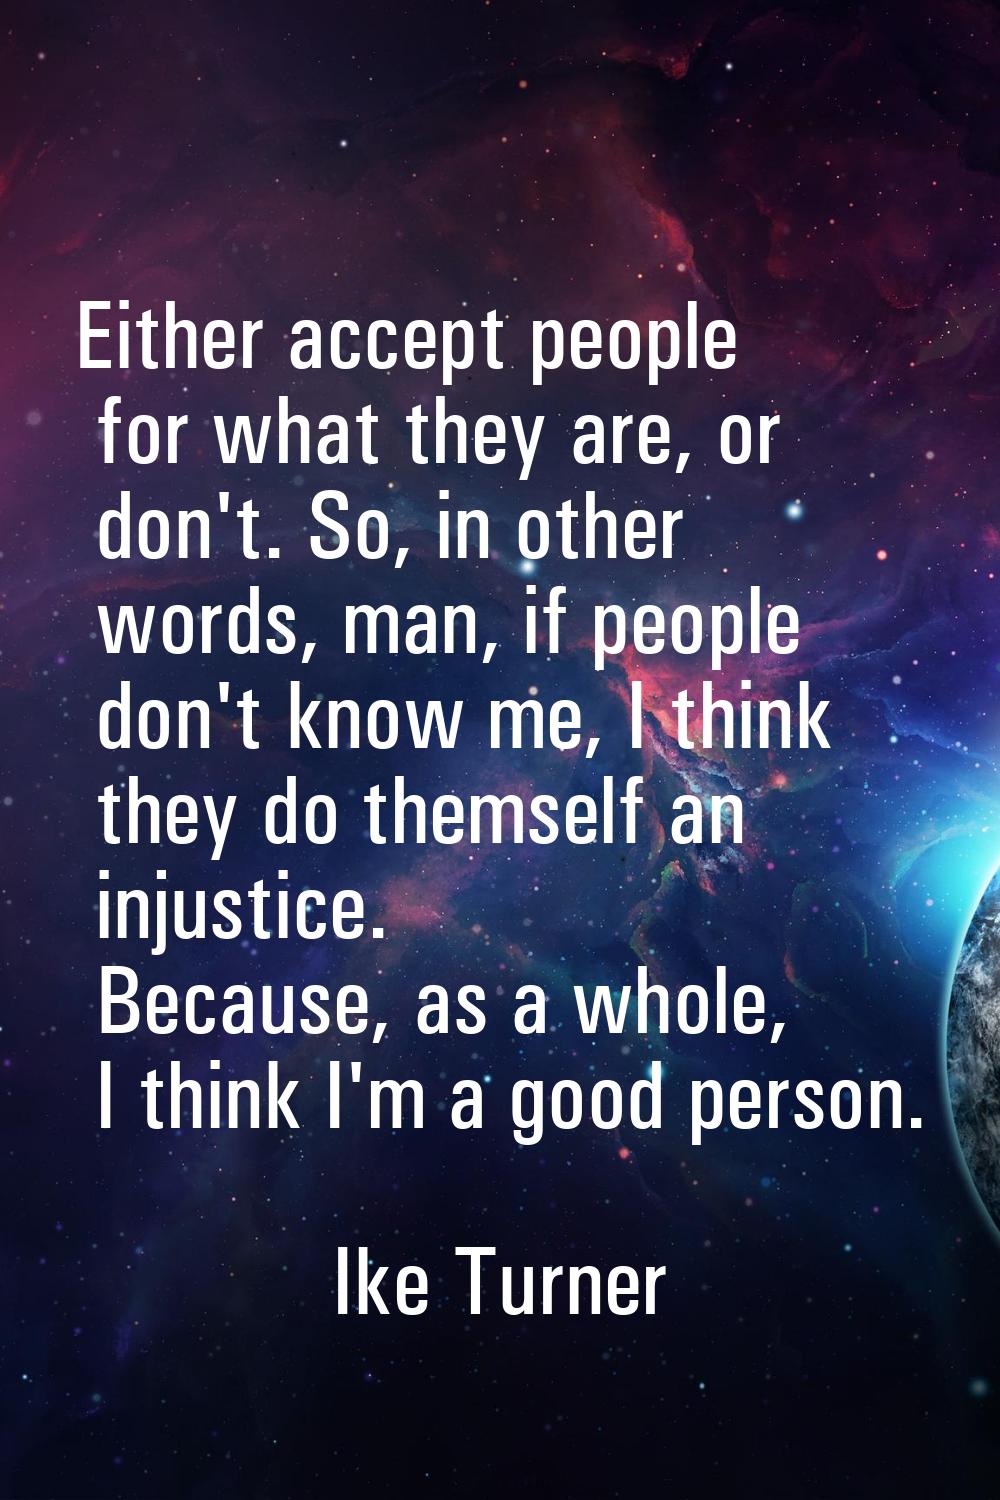 Either accept people for what they are, or don't. So, in other words, man, if people don't know me,